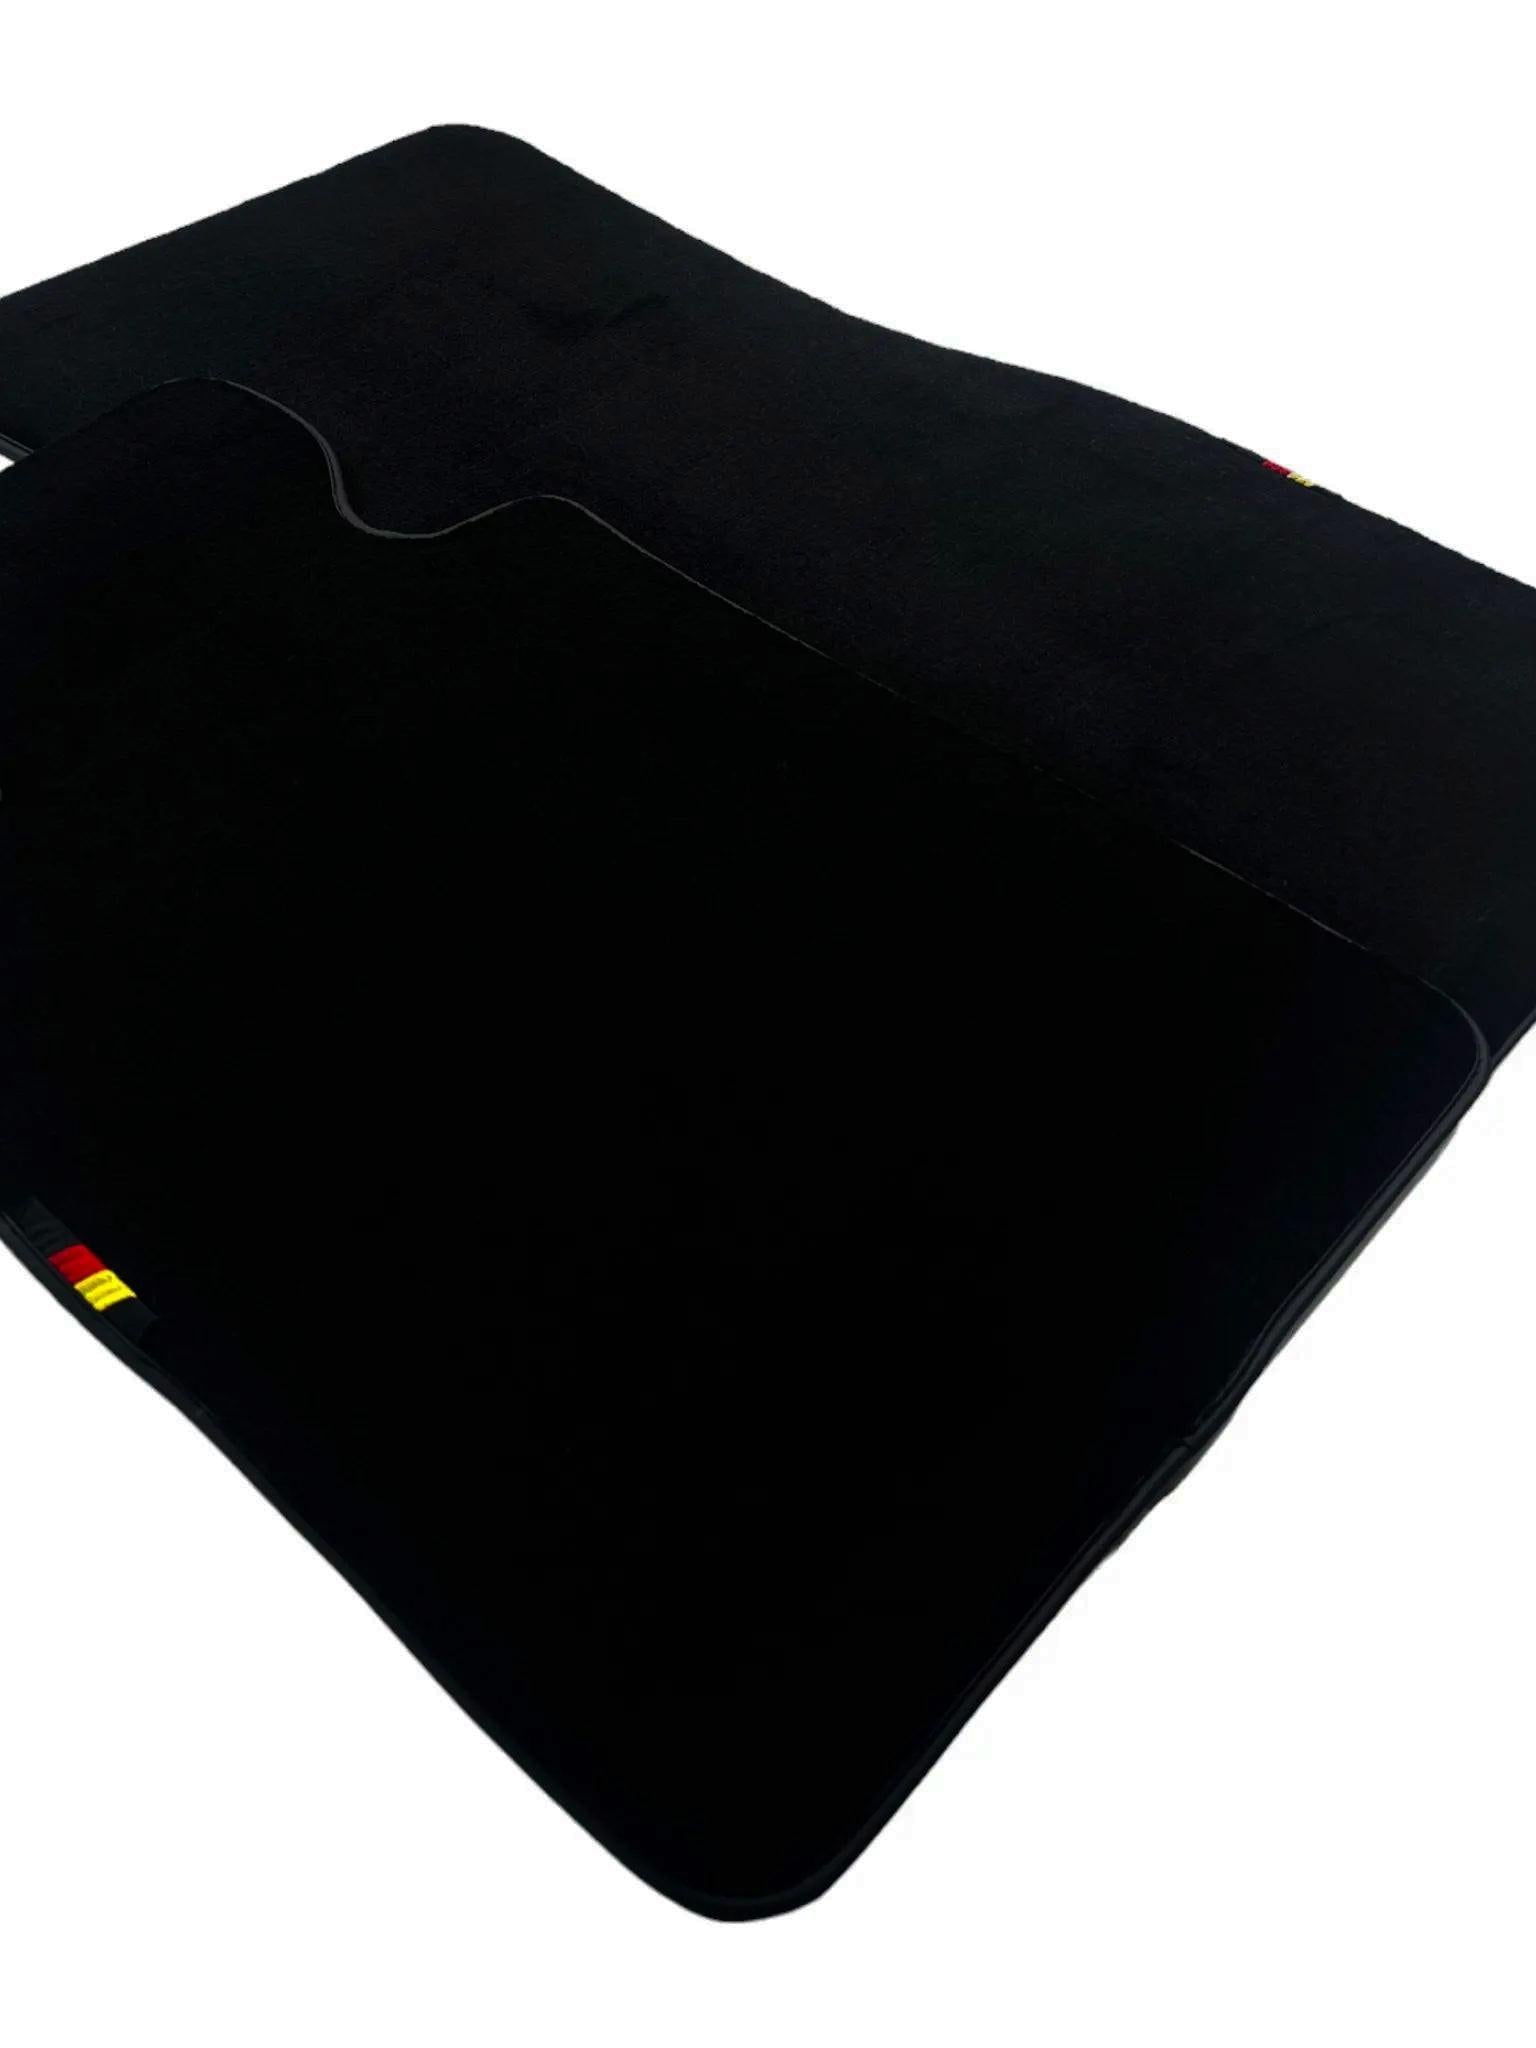 Black Floor Floor Mats For BMW X5 Series E70 Germany Edition - AutoWin